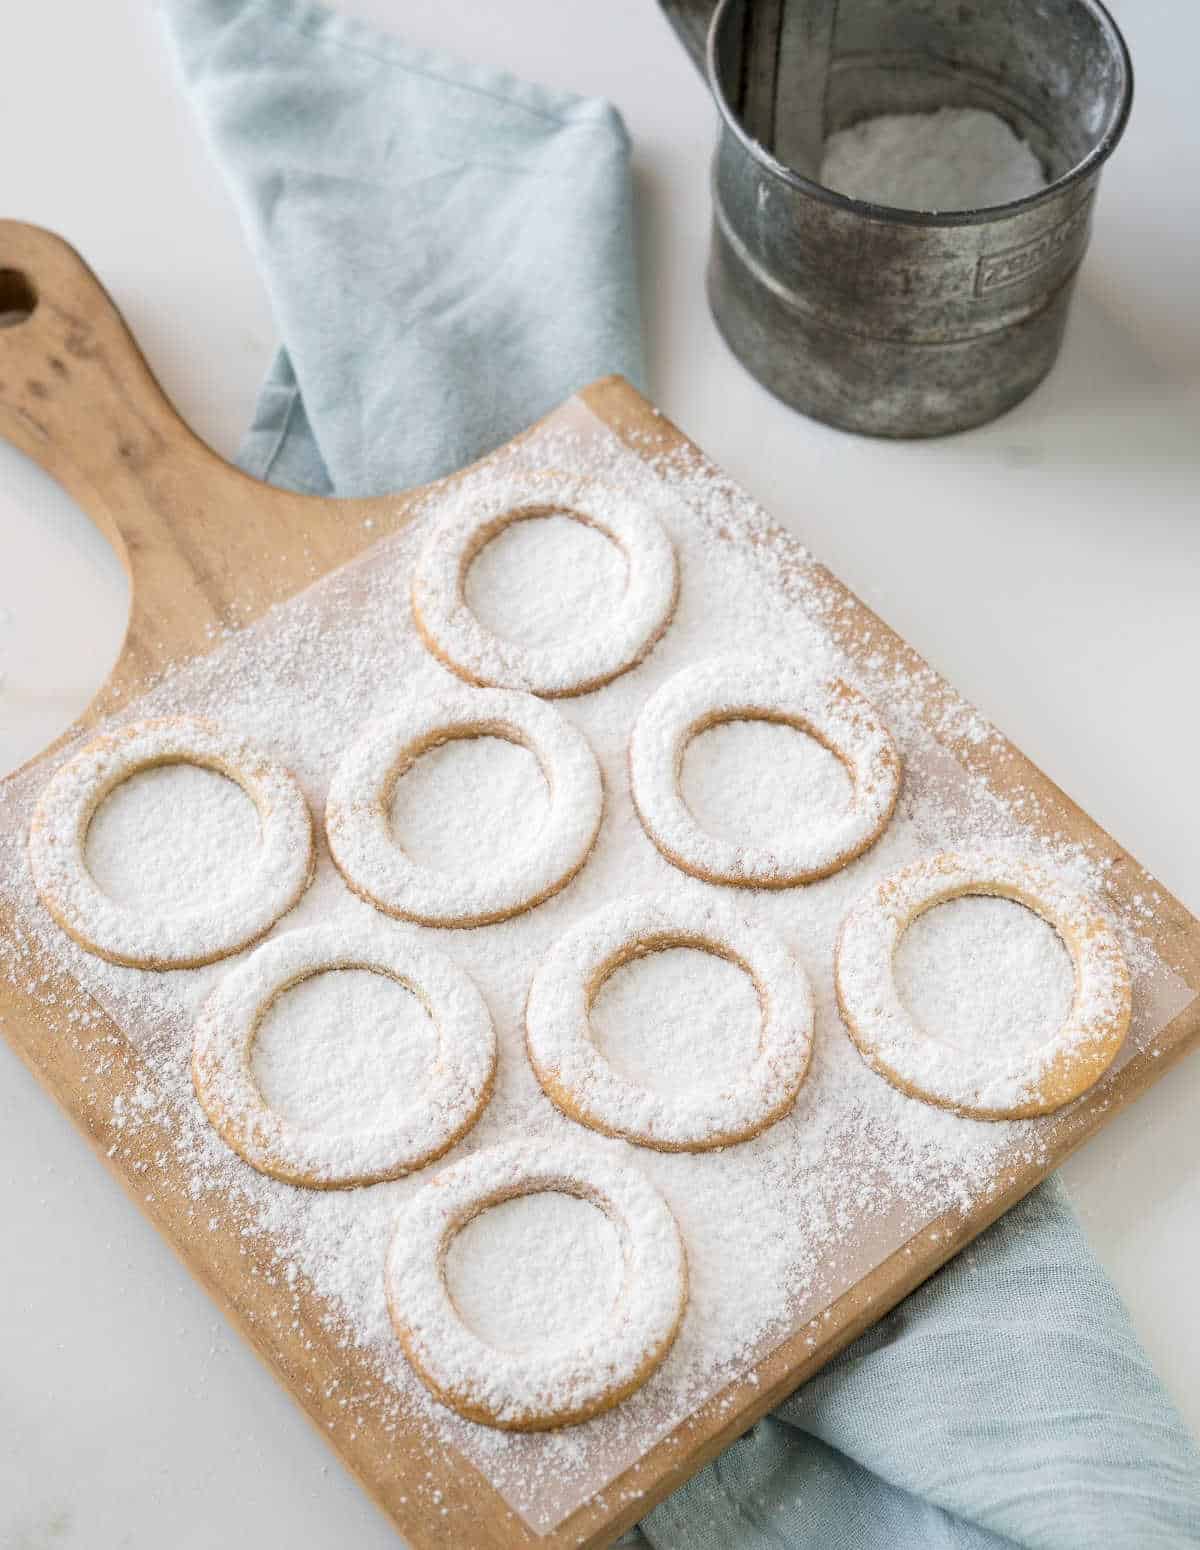 Wooden board with cookie rings covered in powdered sugar. A sifter and light blue cloth.